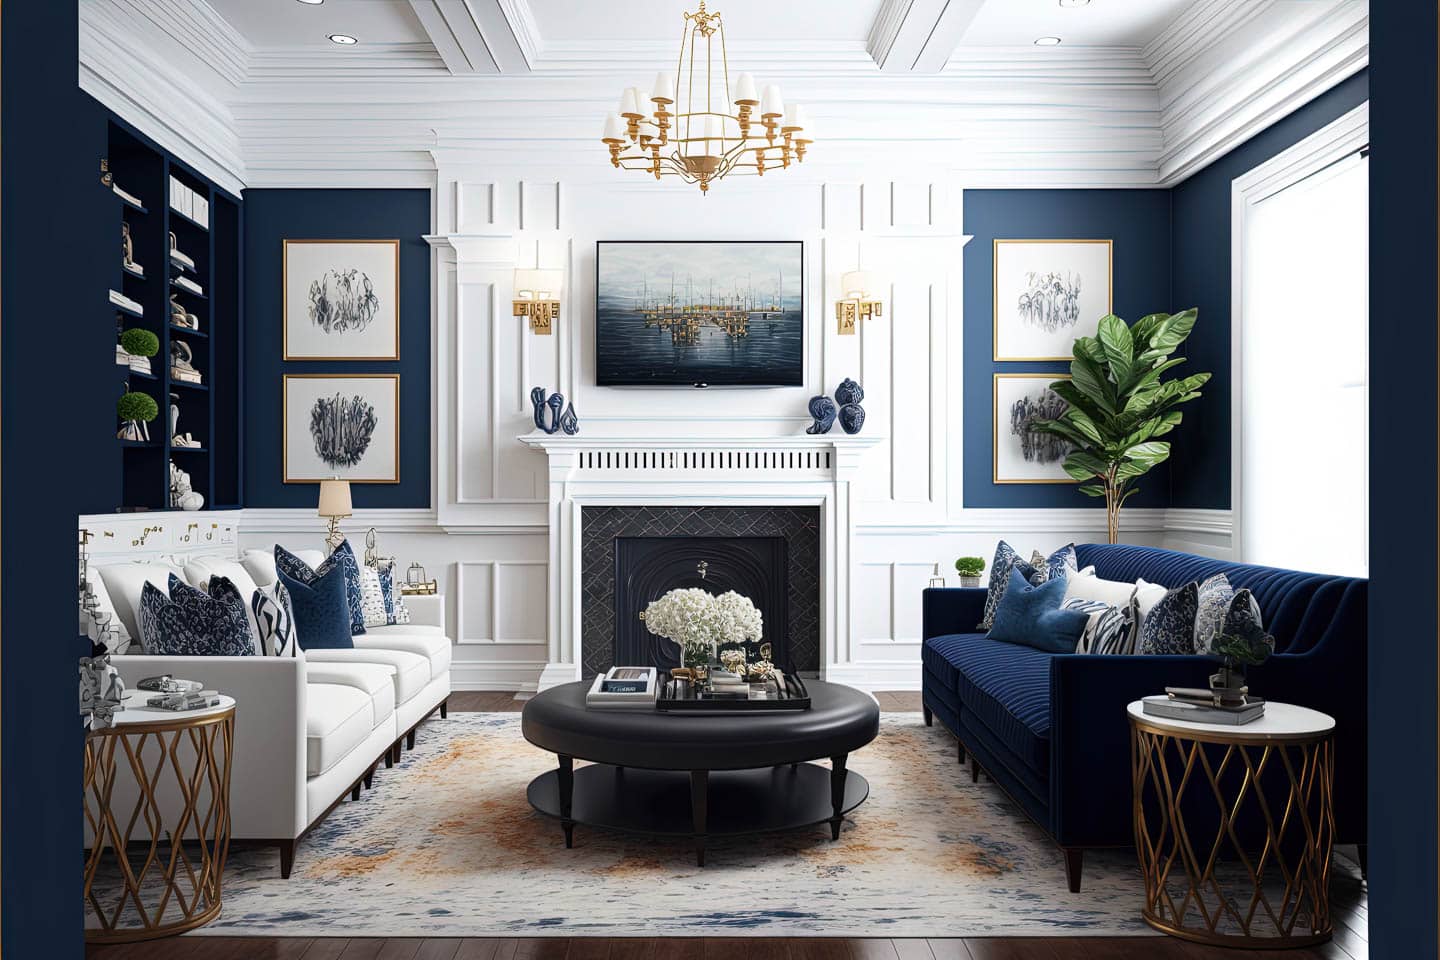 A navy blue and white living room with a white sofa, a navy blue sofa and a round black ottoman between them